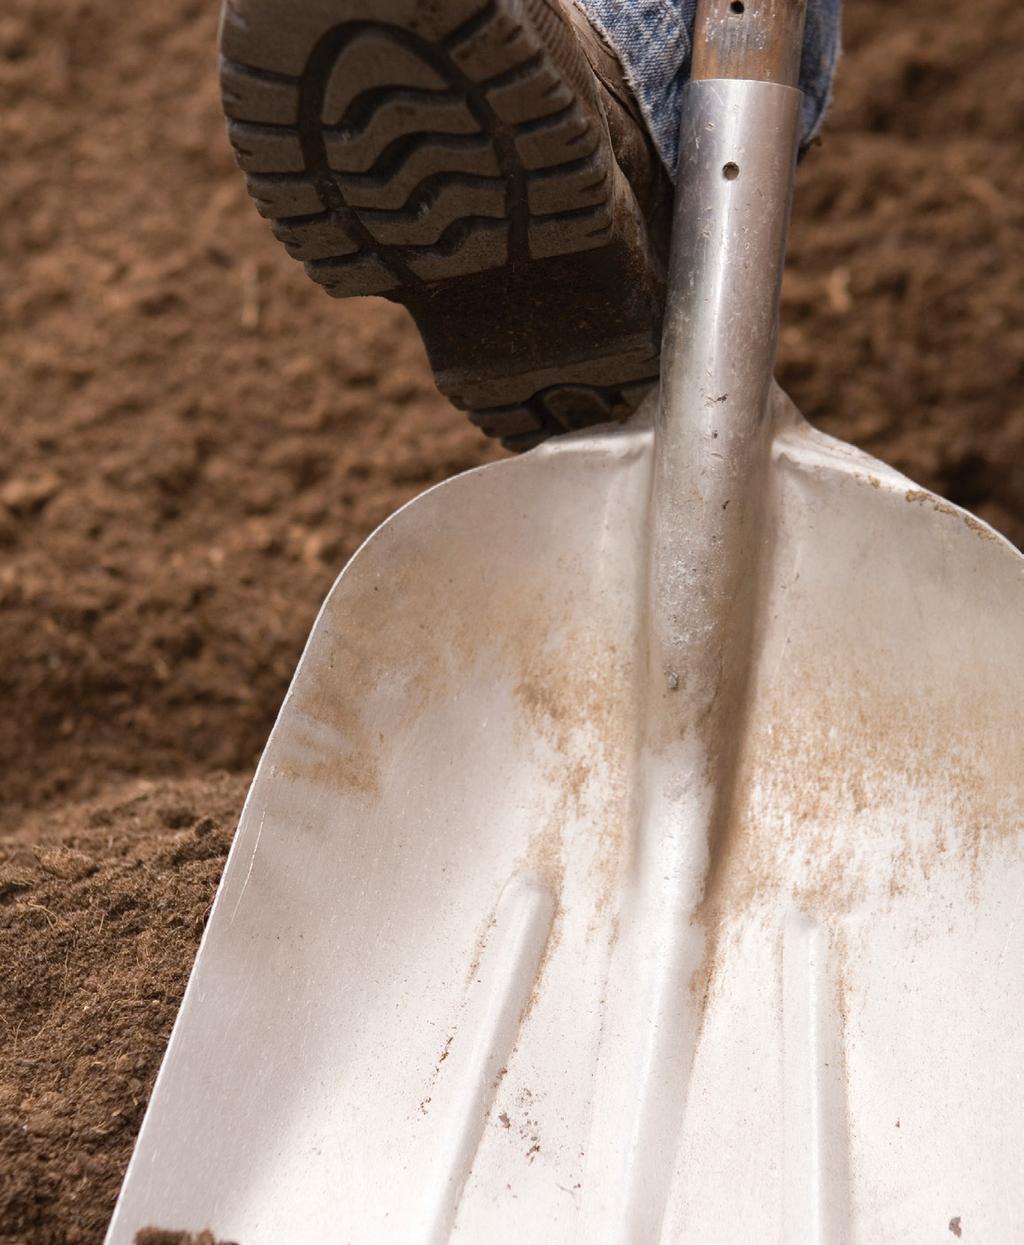 CLICK BEFORE YOU DIG AVOID DAMAGING GAS, ELECTRIC AND UTILITY LINES THAT MAY BE BURIED A FEW INCHES UNDERGROUND.